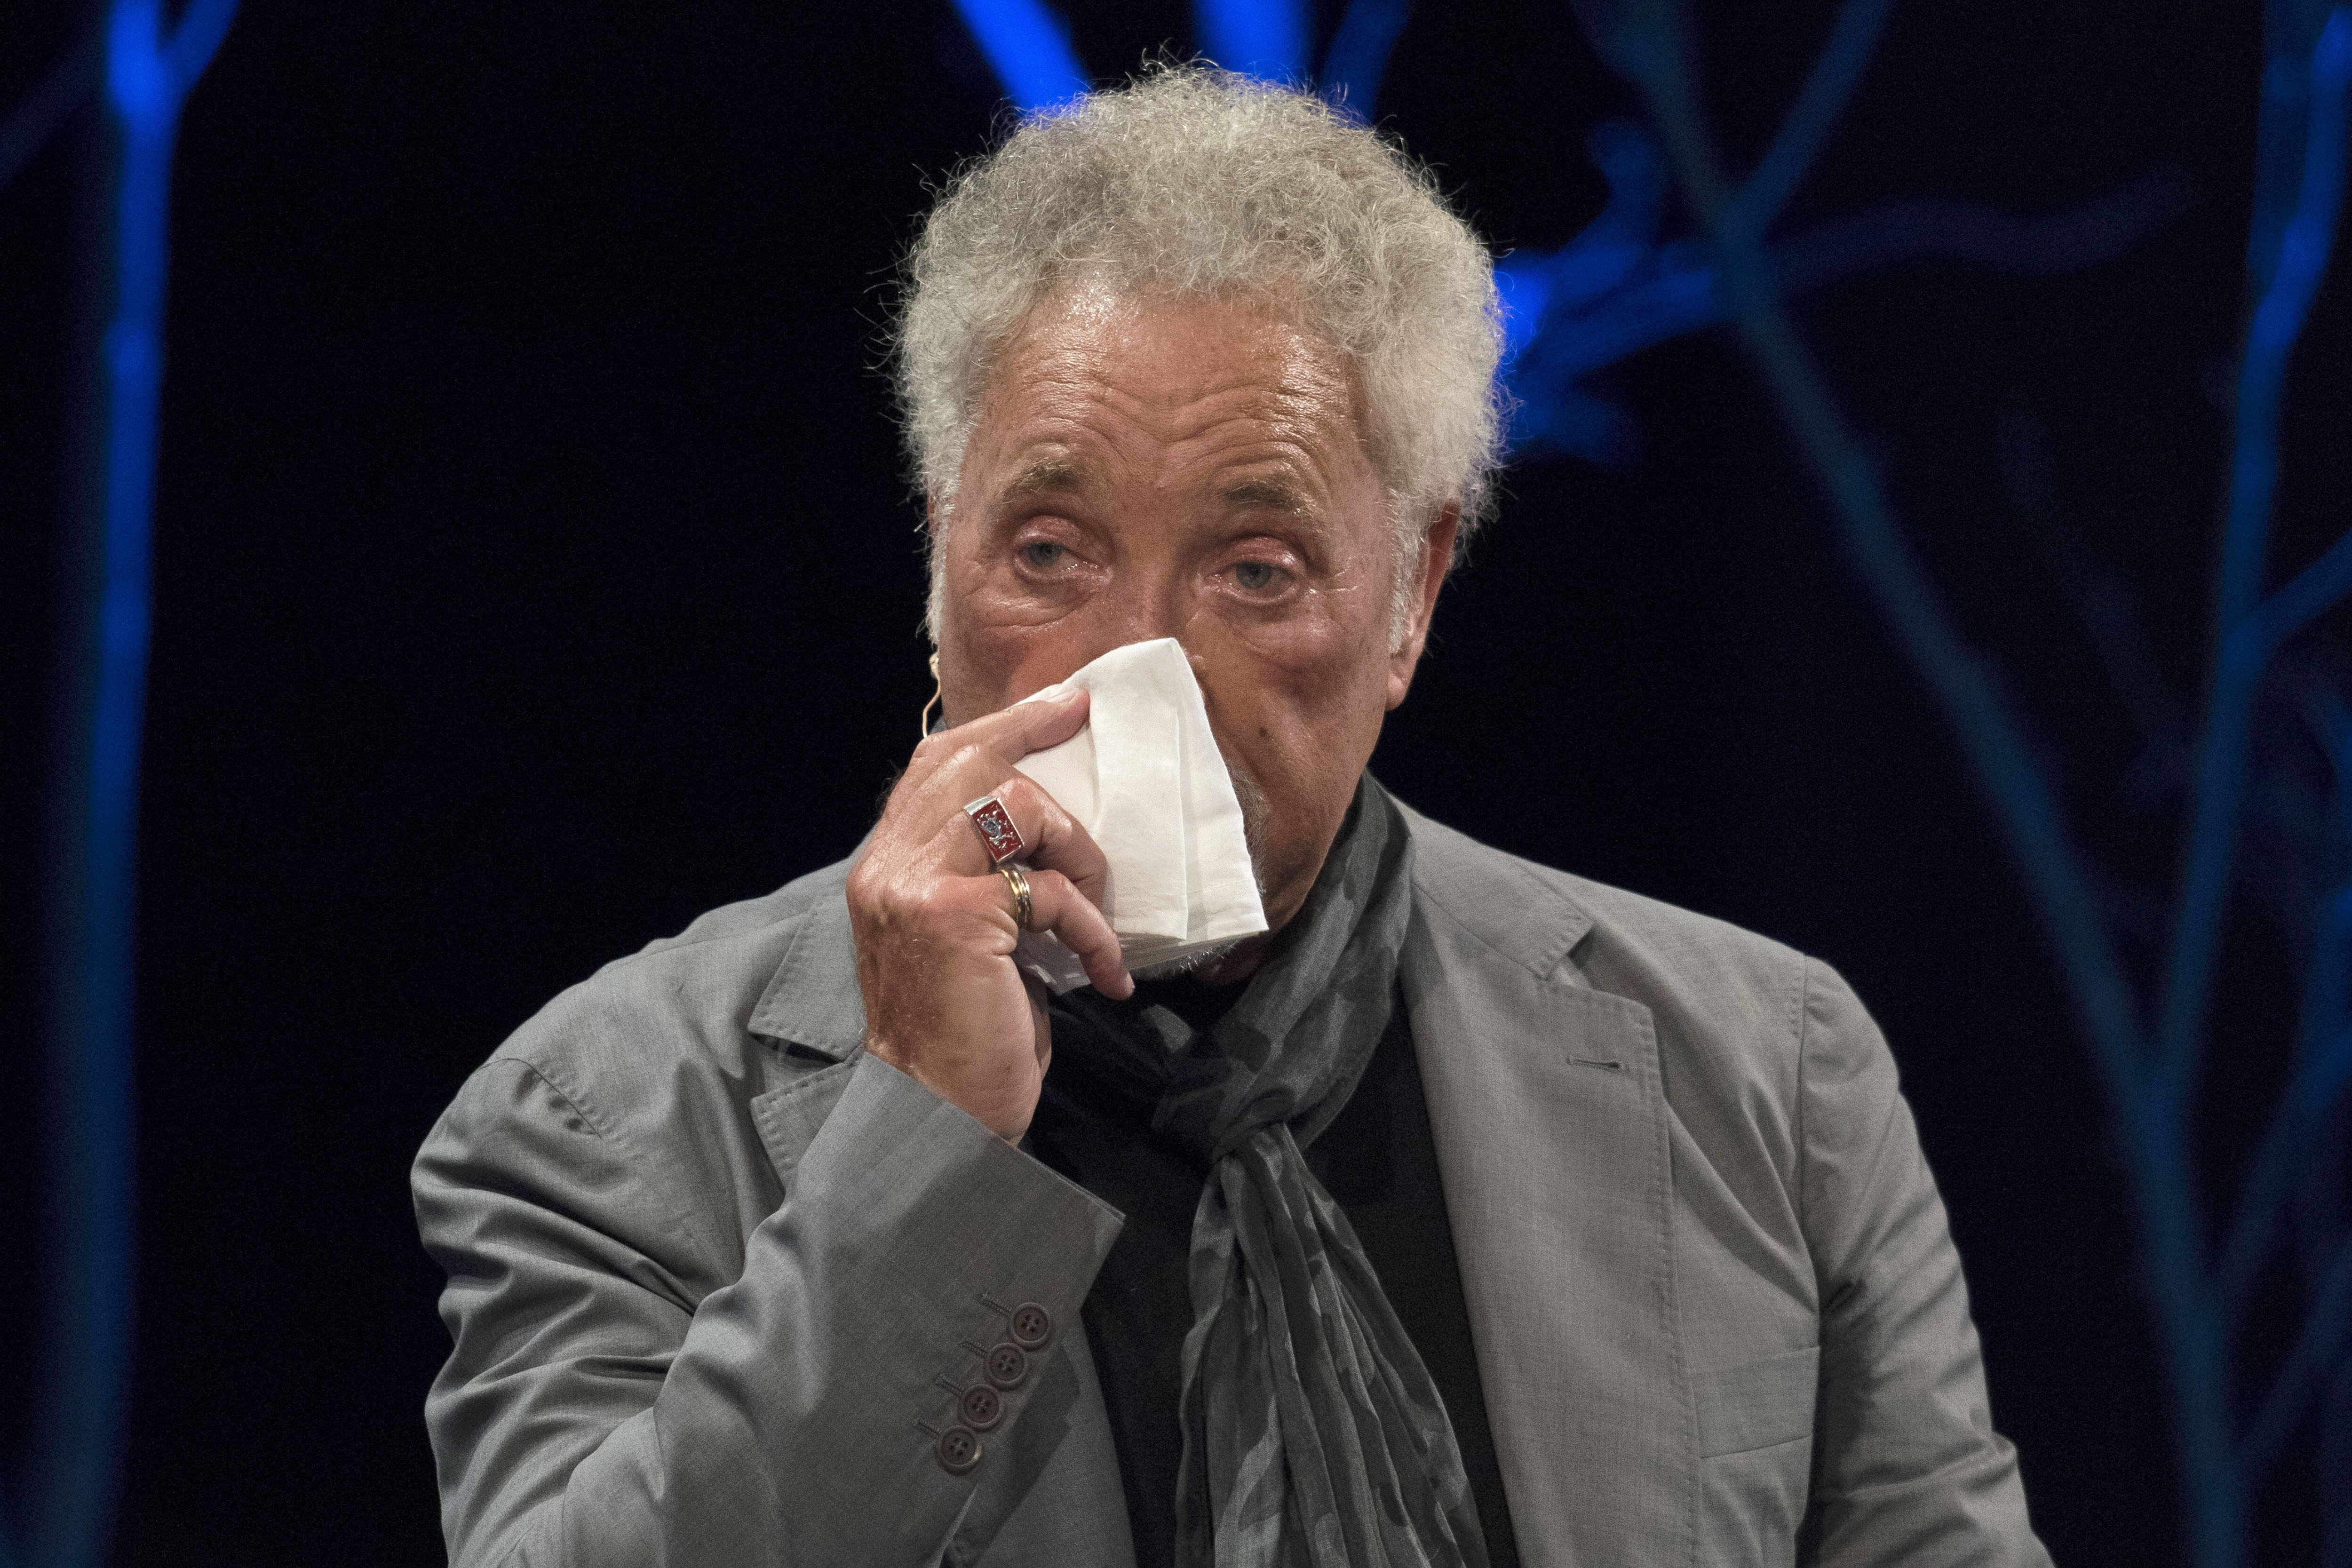 Sir Tom Jones appears to fight back tears during the 2016 Hay Festival on June 5, 2016 in Hay-on-Wye, Wales | Source: Getty Images